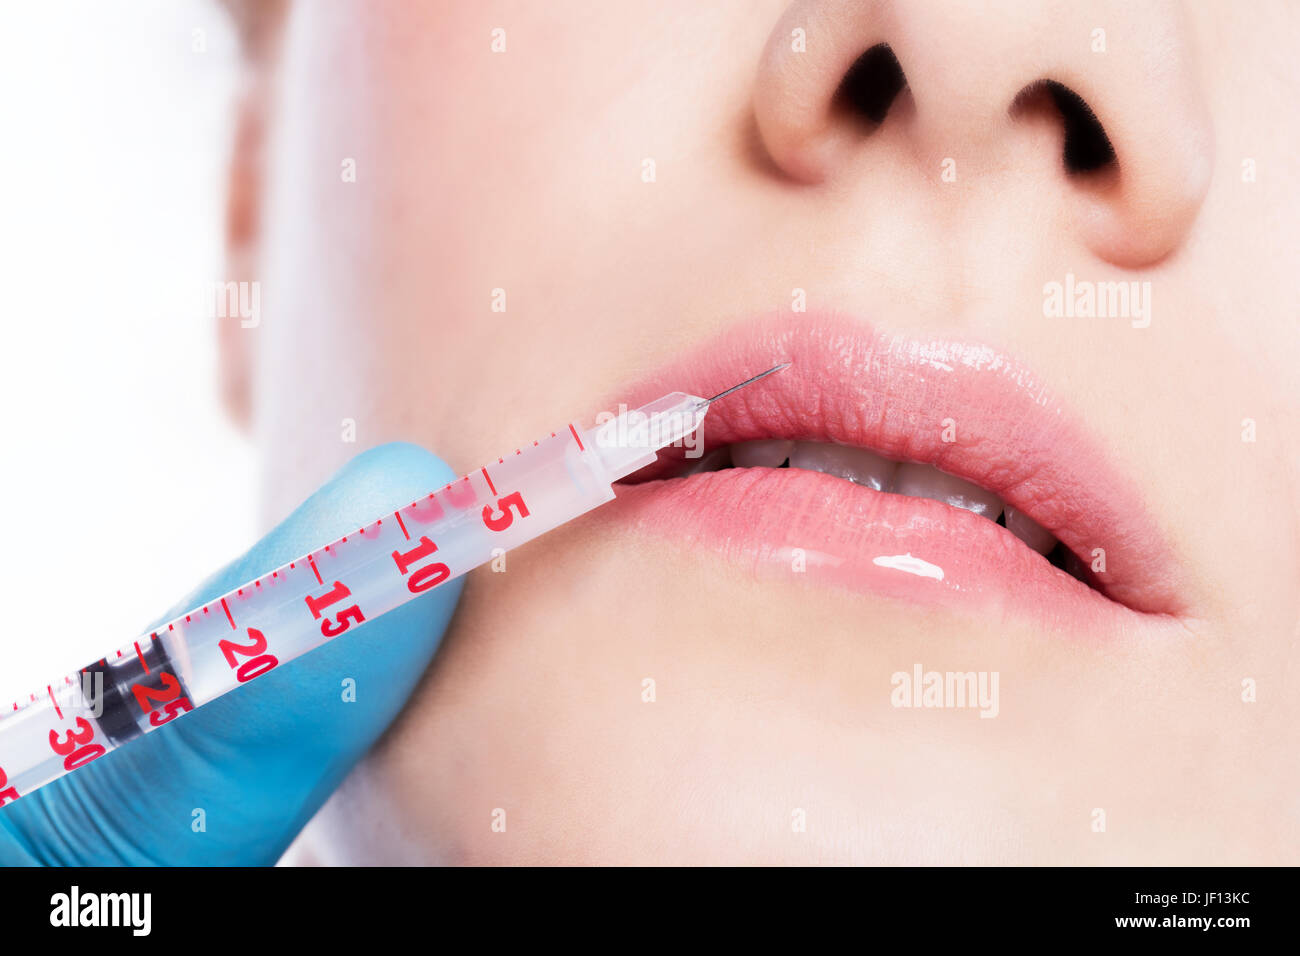 Aesthetic medicine. Young beautiful woman is having botox lips injection. Anti-aging skincare and plastic surgery concept. Stock Photo